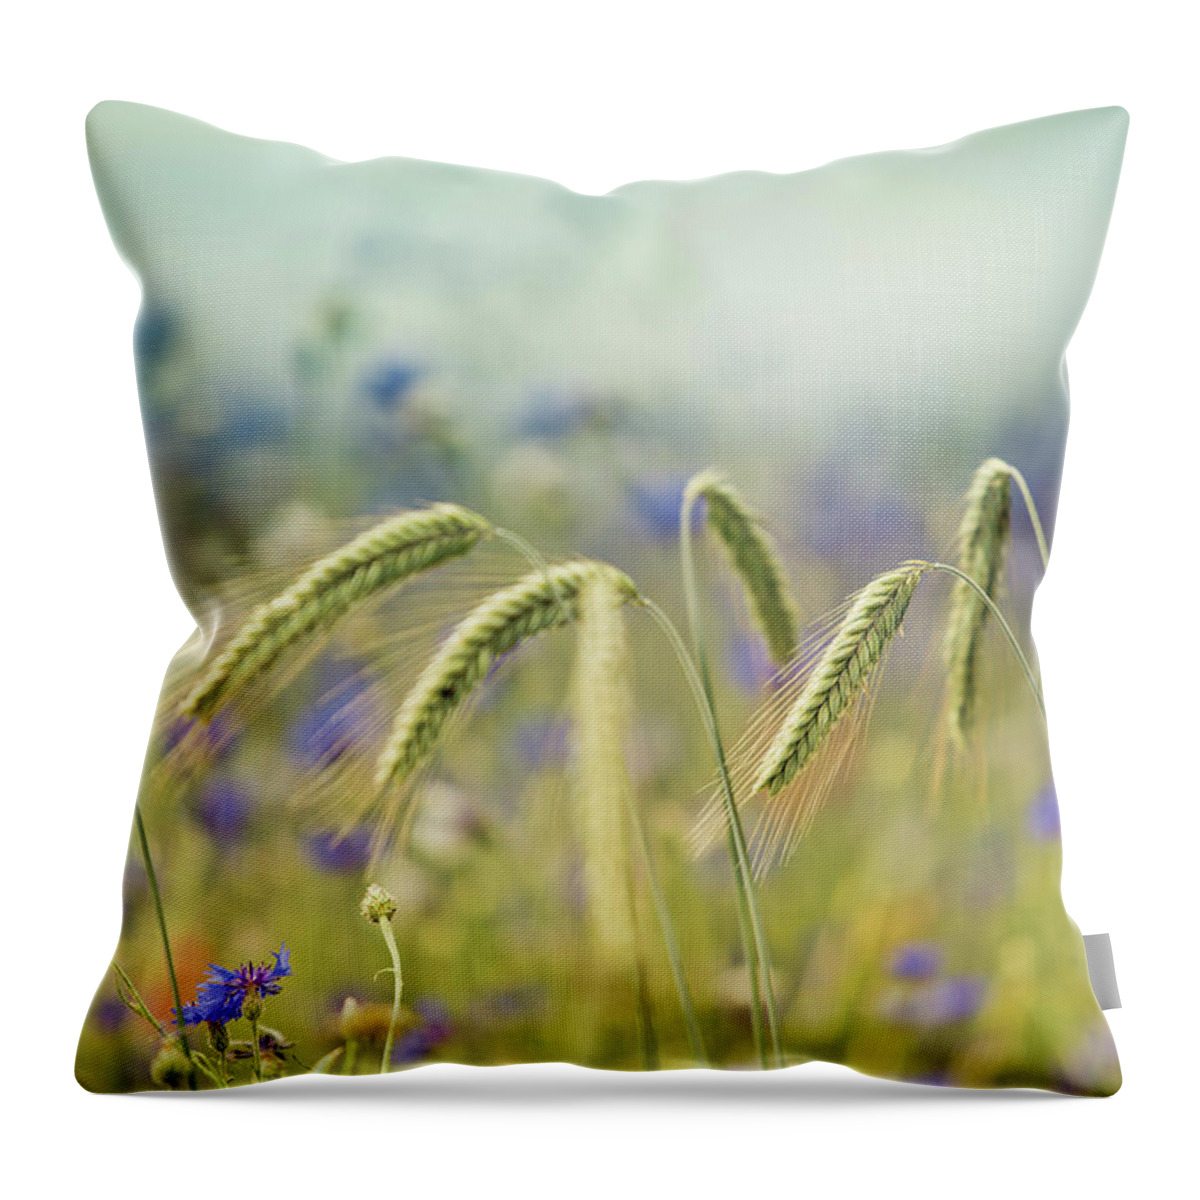 Wheat Throw Pillow featuring the photograph Wheat And Corn Flowers by Nailia Schwarz